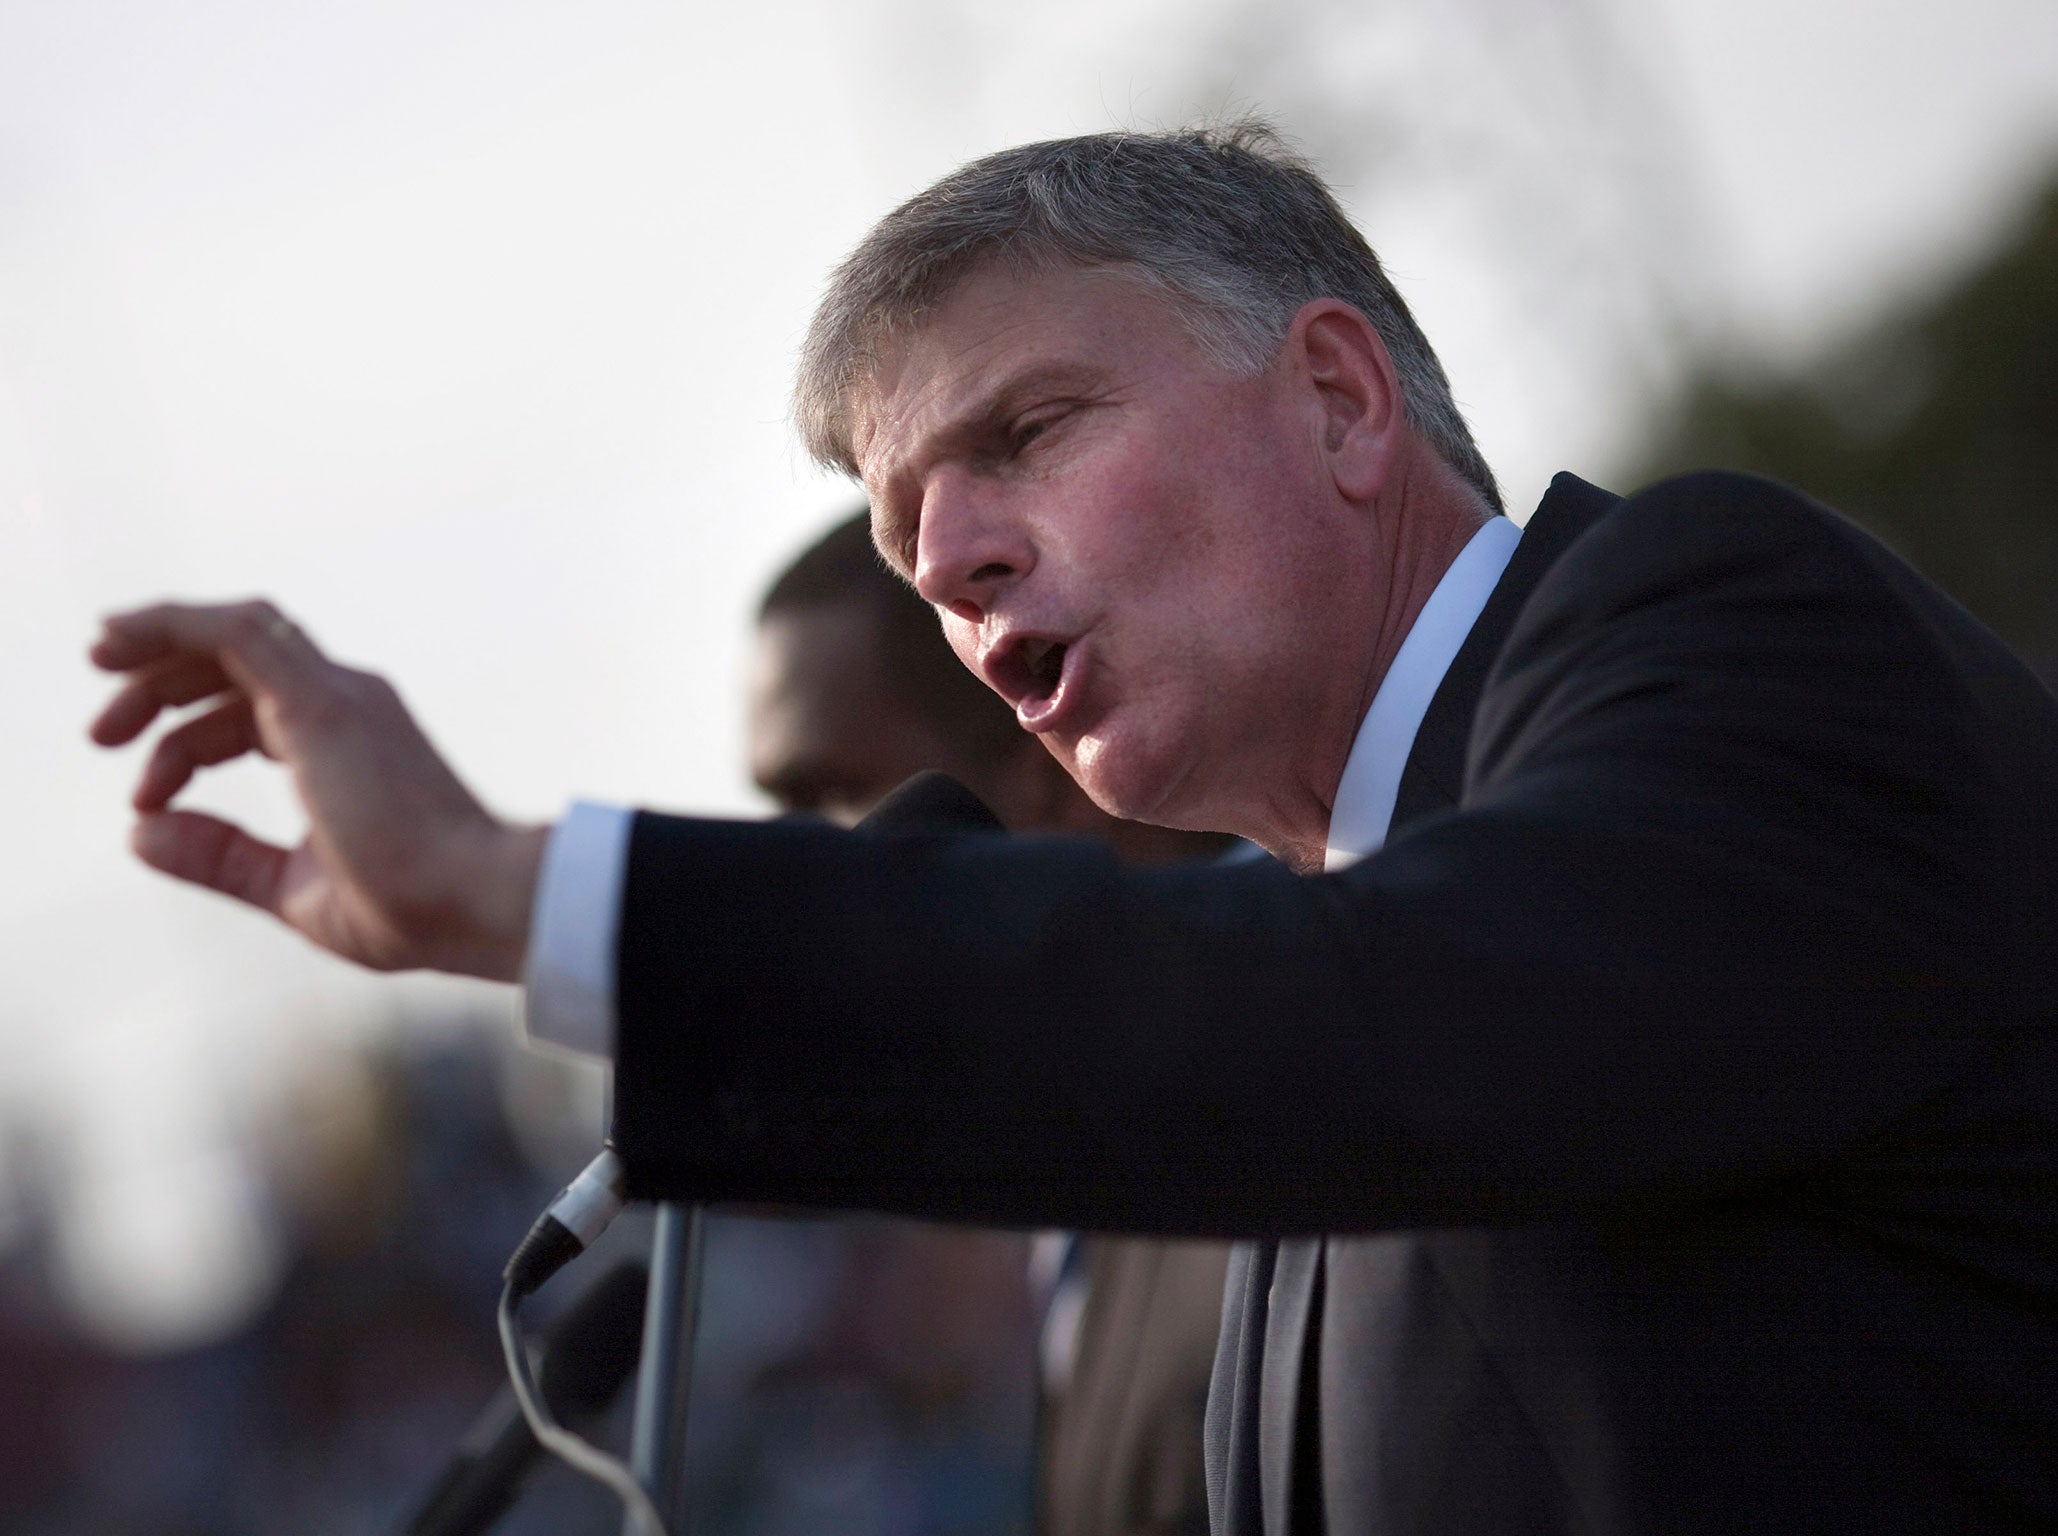 Franklin Graham called on donors to withhold money until decision was reversed